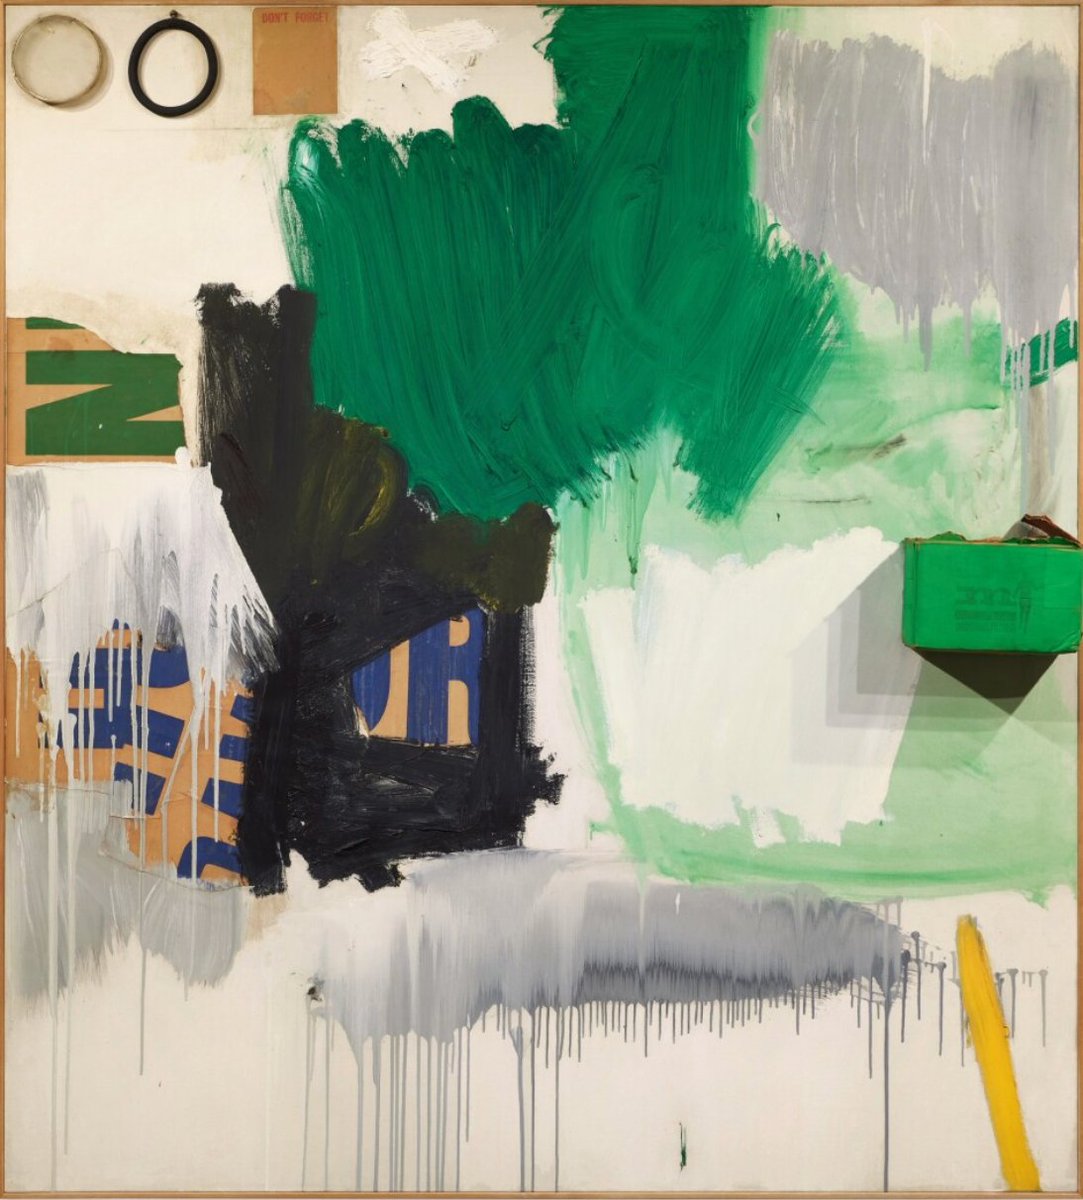 #AuctionUpdate: ‘Vitamin’ by Robert Rauschenberg, a work of remarkable intimacy, vitality, and ingenuity, a magnificent summation of the artist's most defining format within his utterly unique practice, brings $3.5m #TheFisherLandauLegacy